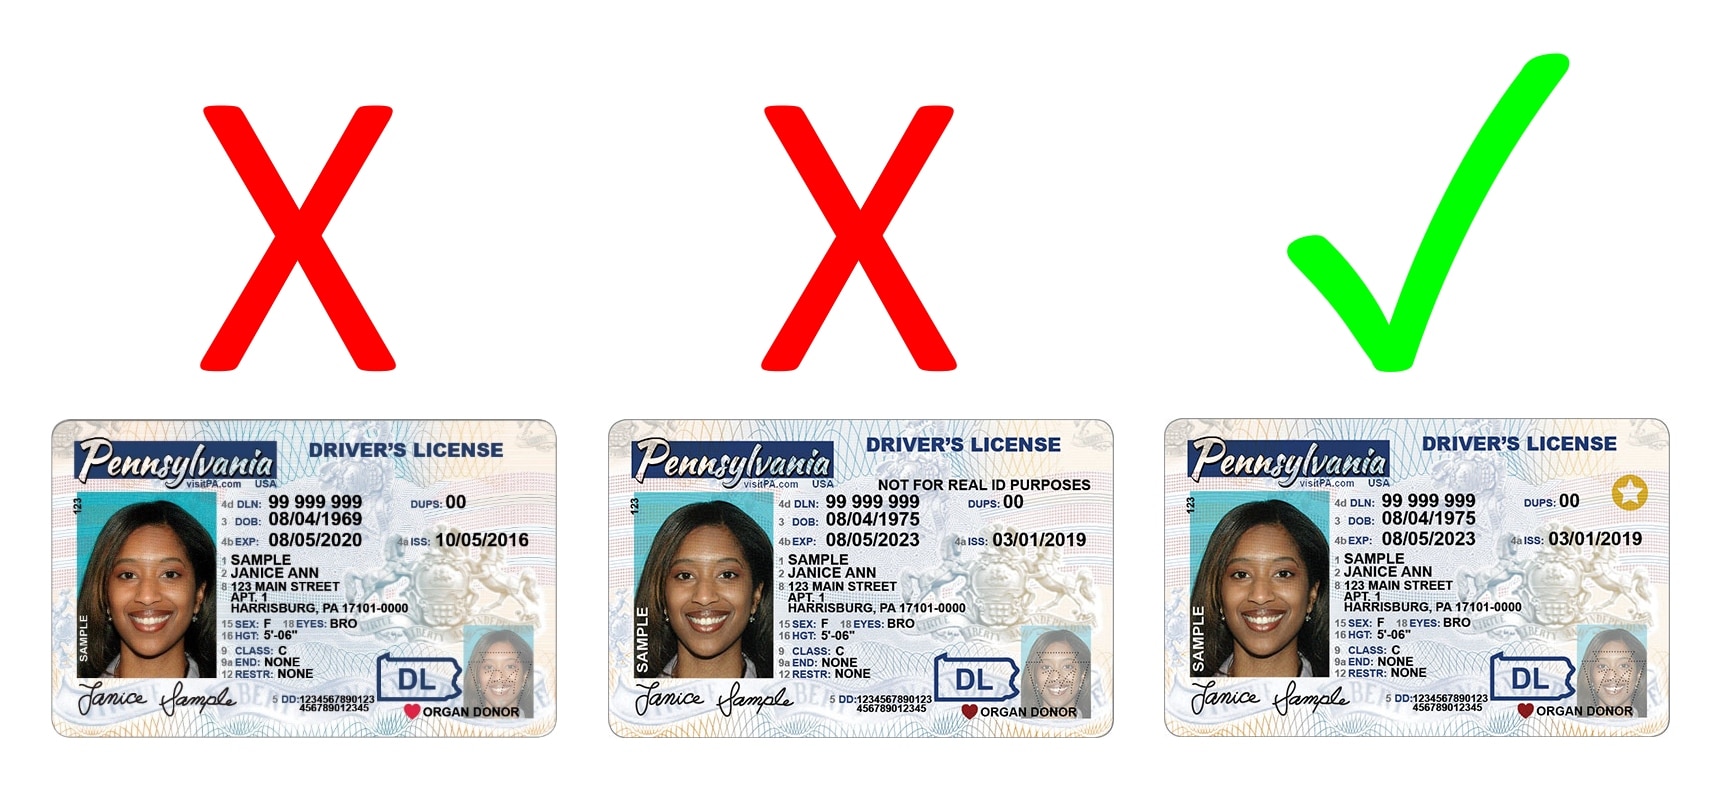 Extension id. Pennsylvania Driver License. Driver License Thailand. Finland Driver License 2023. Michigan Tattoo License requirements.